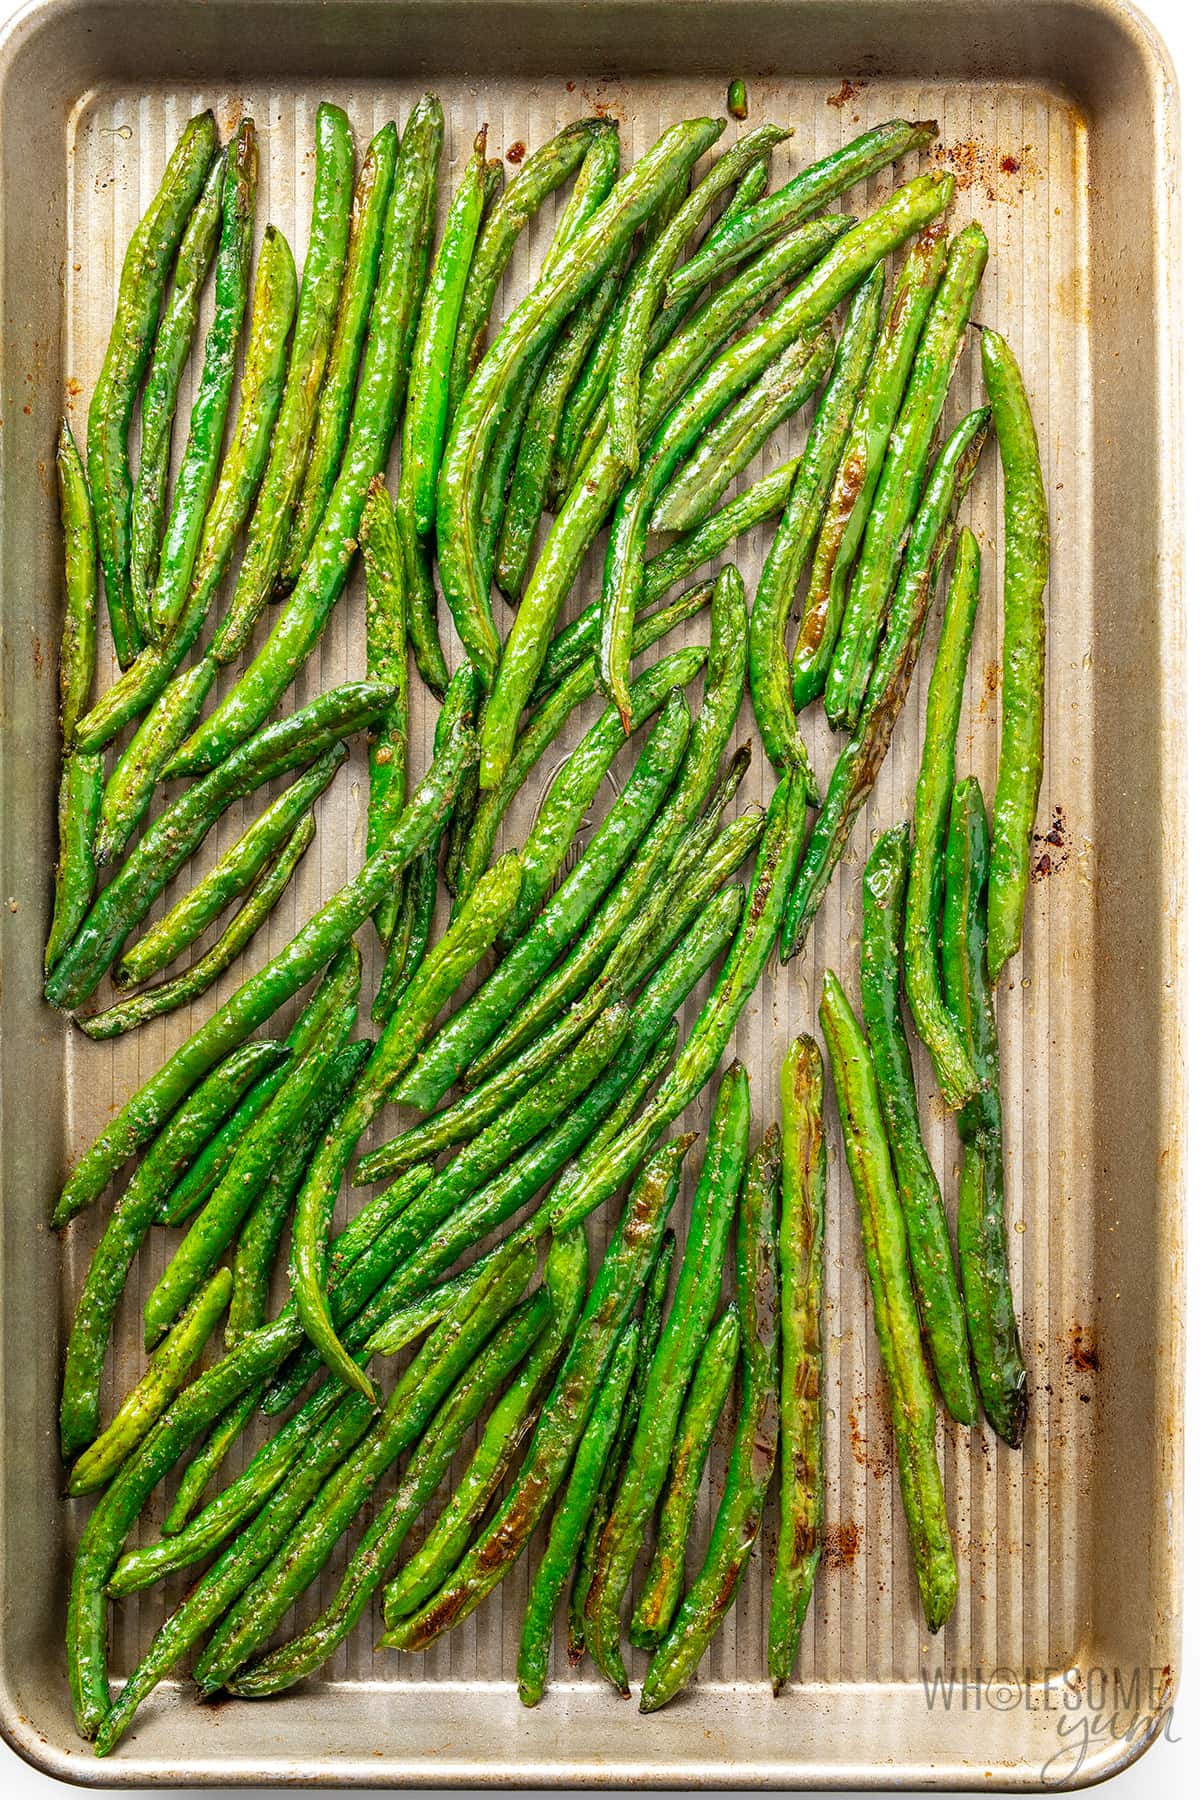 Simple roasted green beans on a sheet pan.